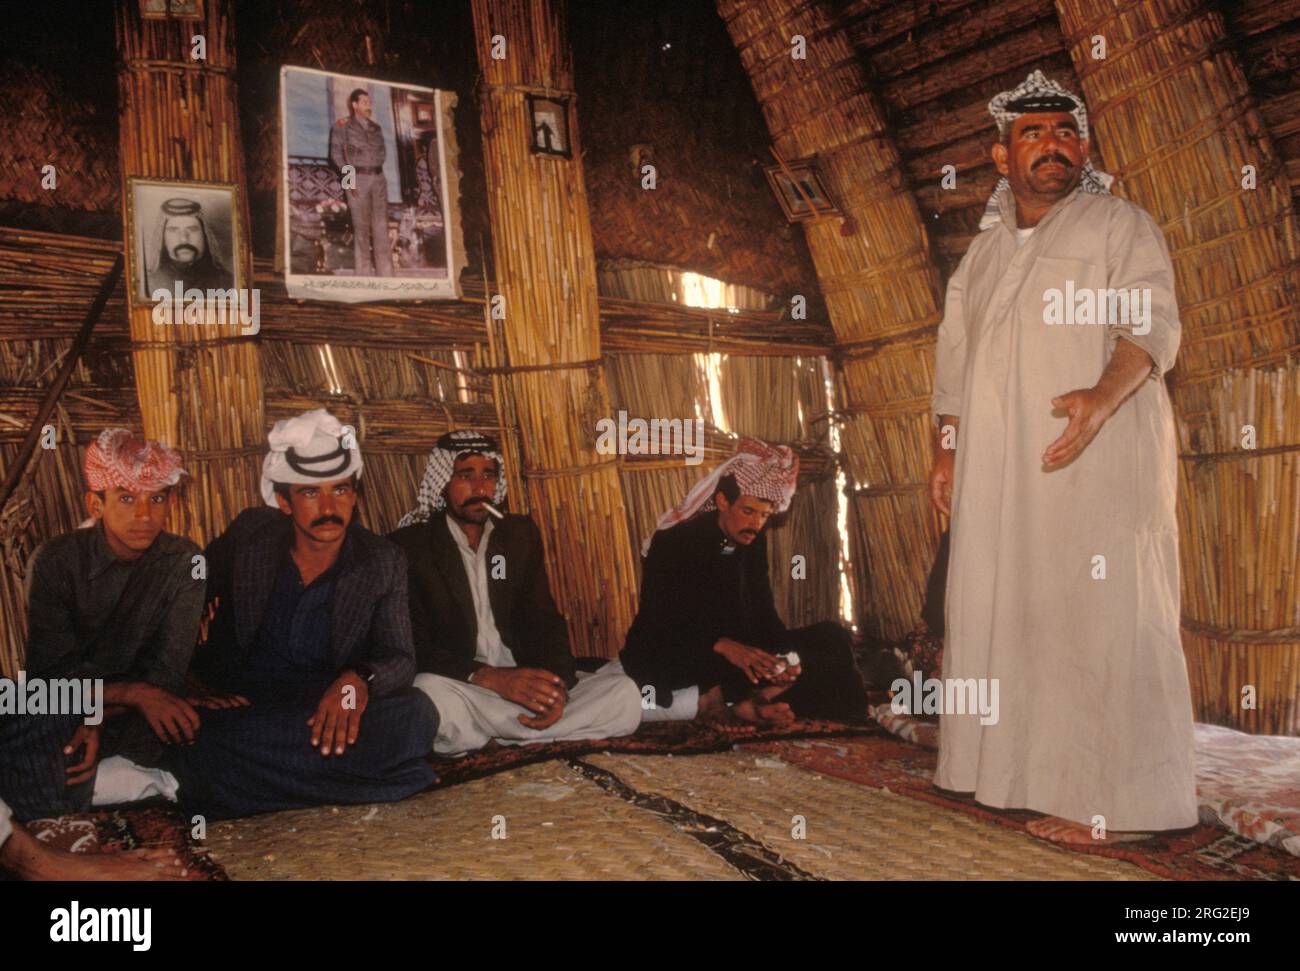 Marsh Arabs Iraq. Marsh Arab men in traditional reed building called Mudhif. There is a village meeting taking place. Photograph of Saddam Hussein on wall. Rivers Tigris and Euphrates wetlands, Hammar marshes. Southern Iraq 1980s 1984 HOMER SYKES Stock Photo